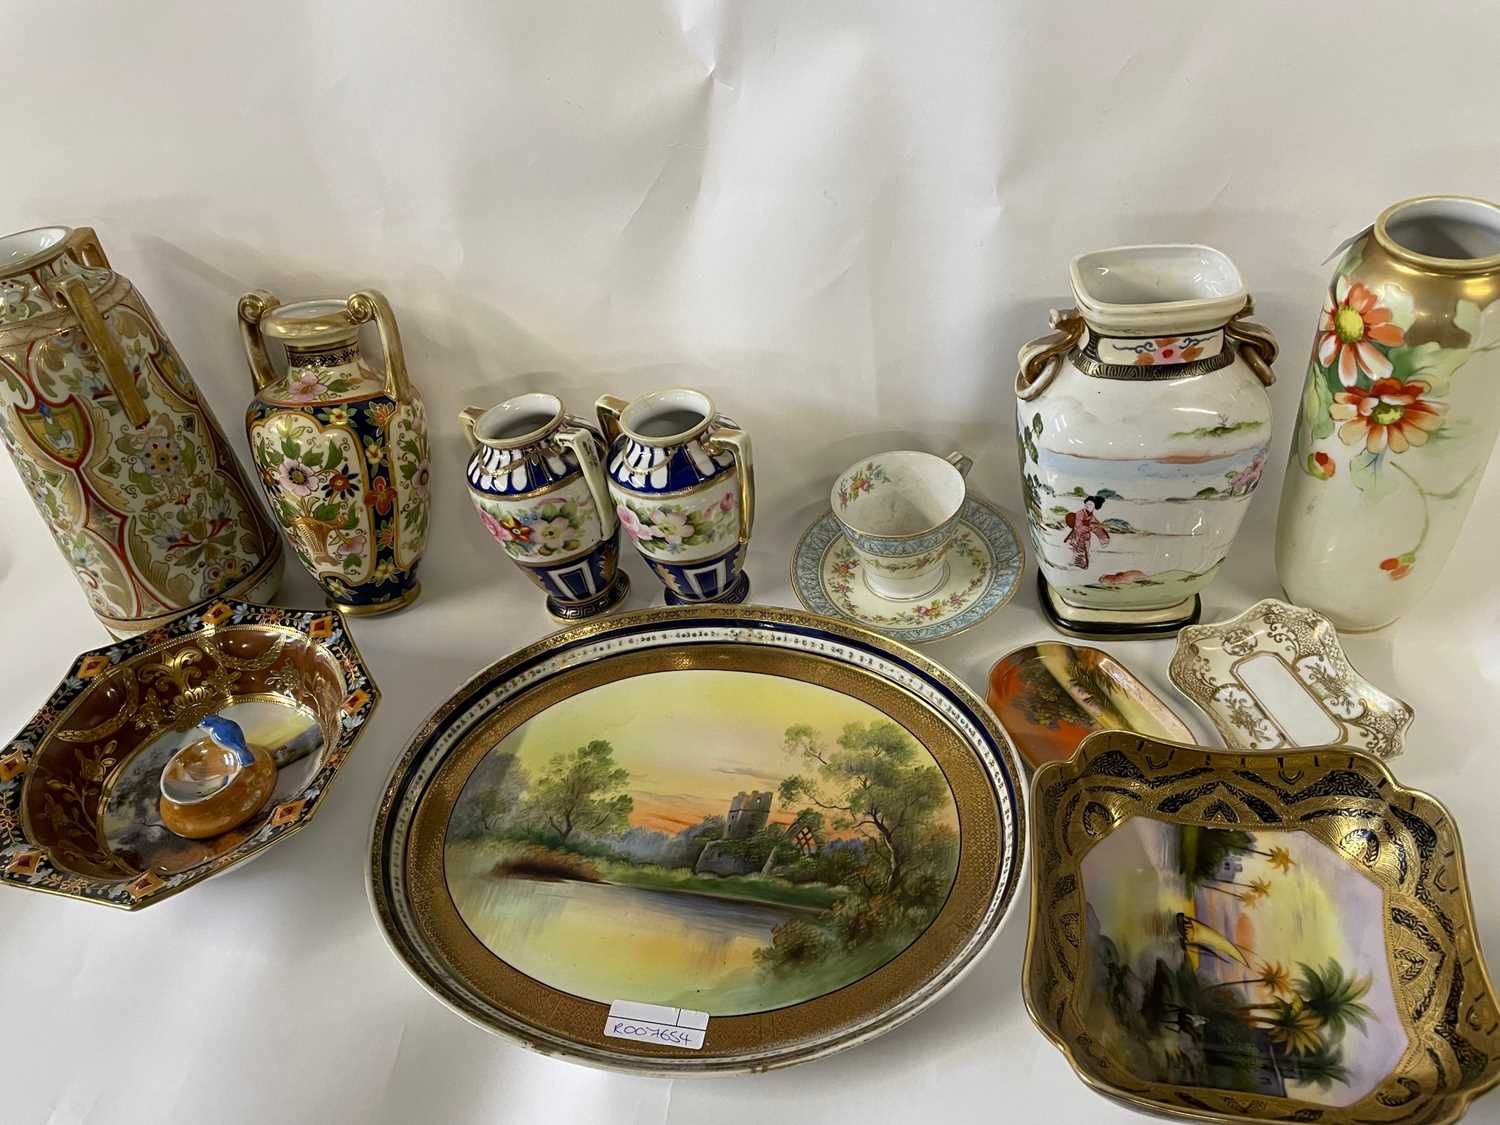 Further group of Noritake wares with floral and landscape designs